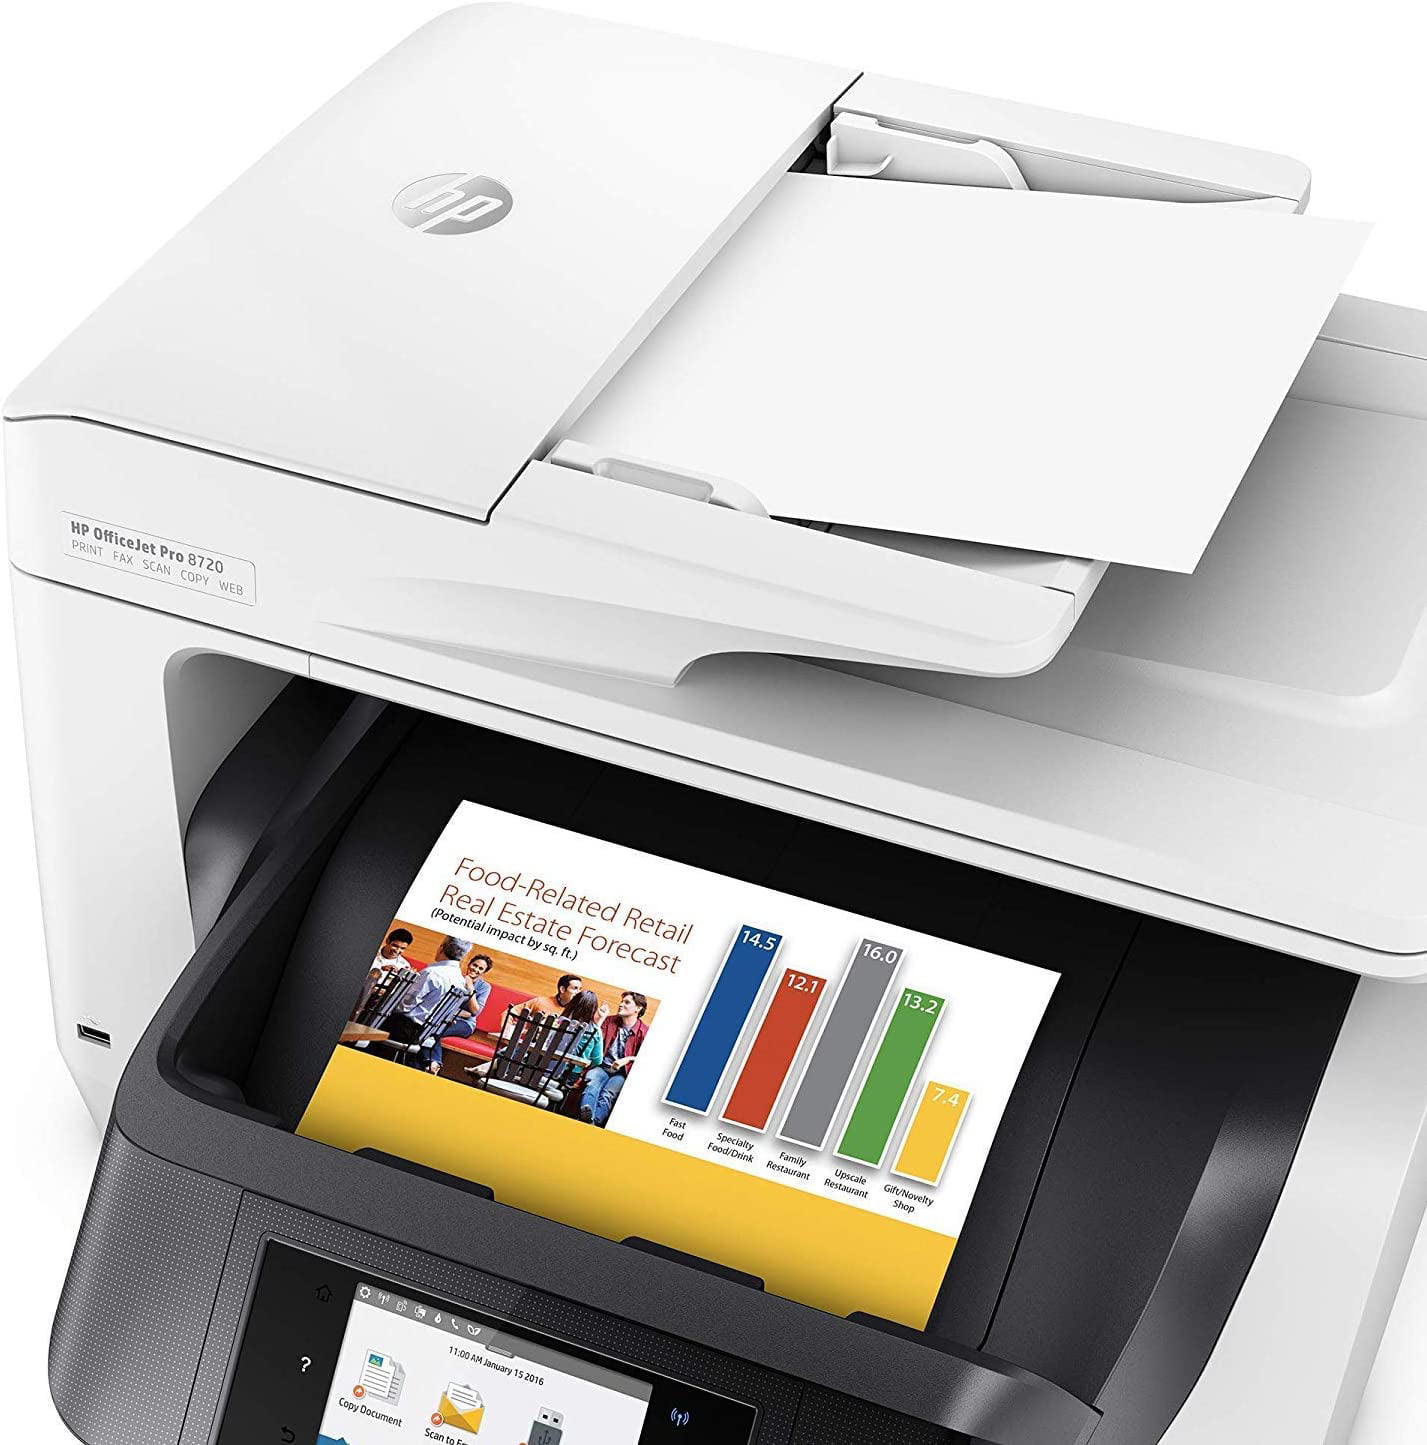 HP OfficeJet Pro 8720 All-in-One Wireless Printer, HP Instant Ink or   Dash replenishment ready - Black (M9L74A)